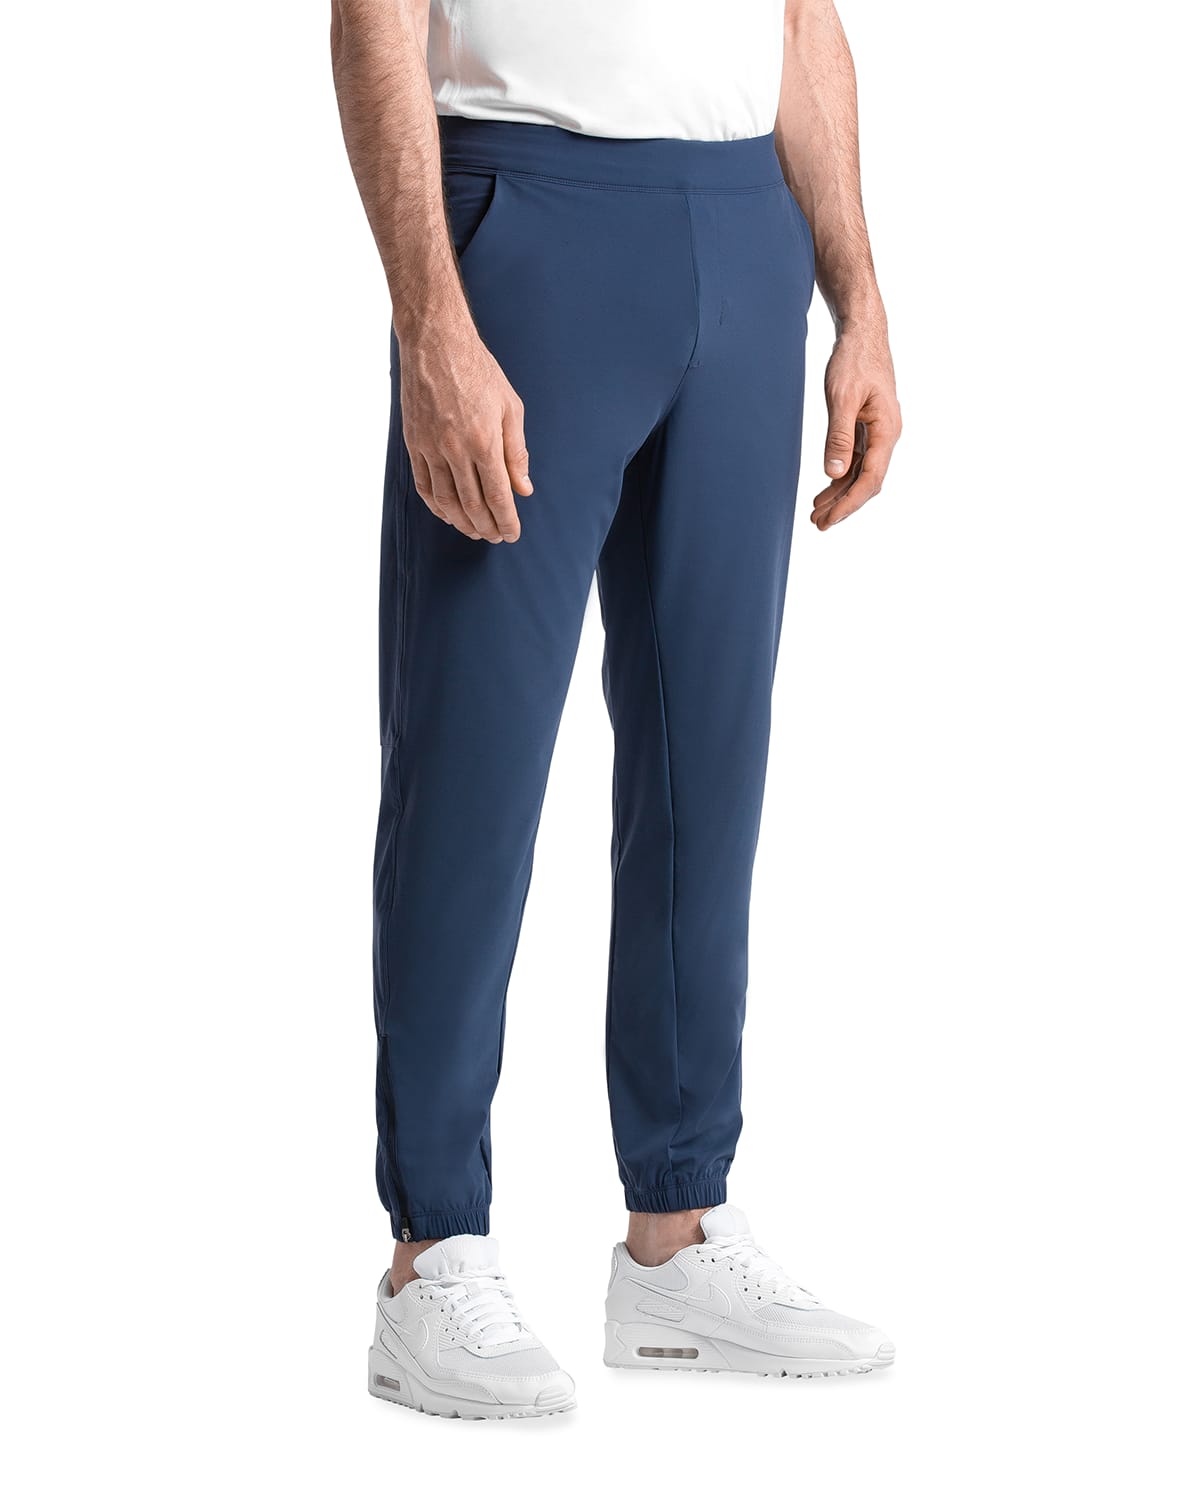 Public Rec Men's All Day Every Day Jogger Pants